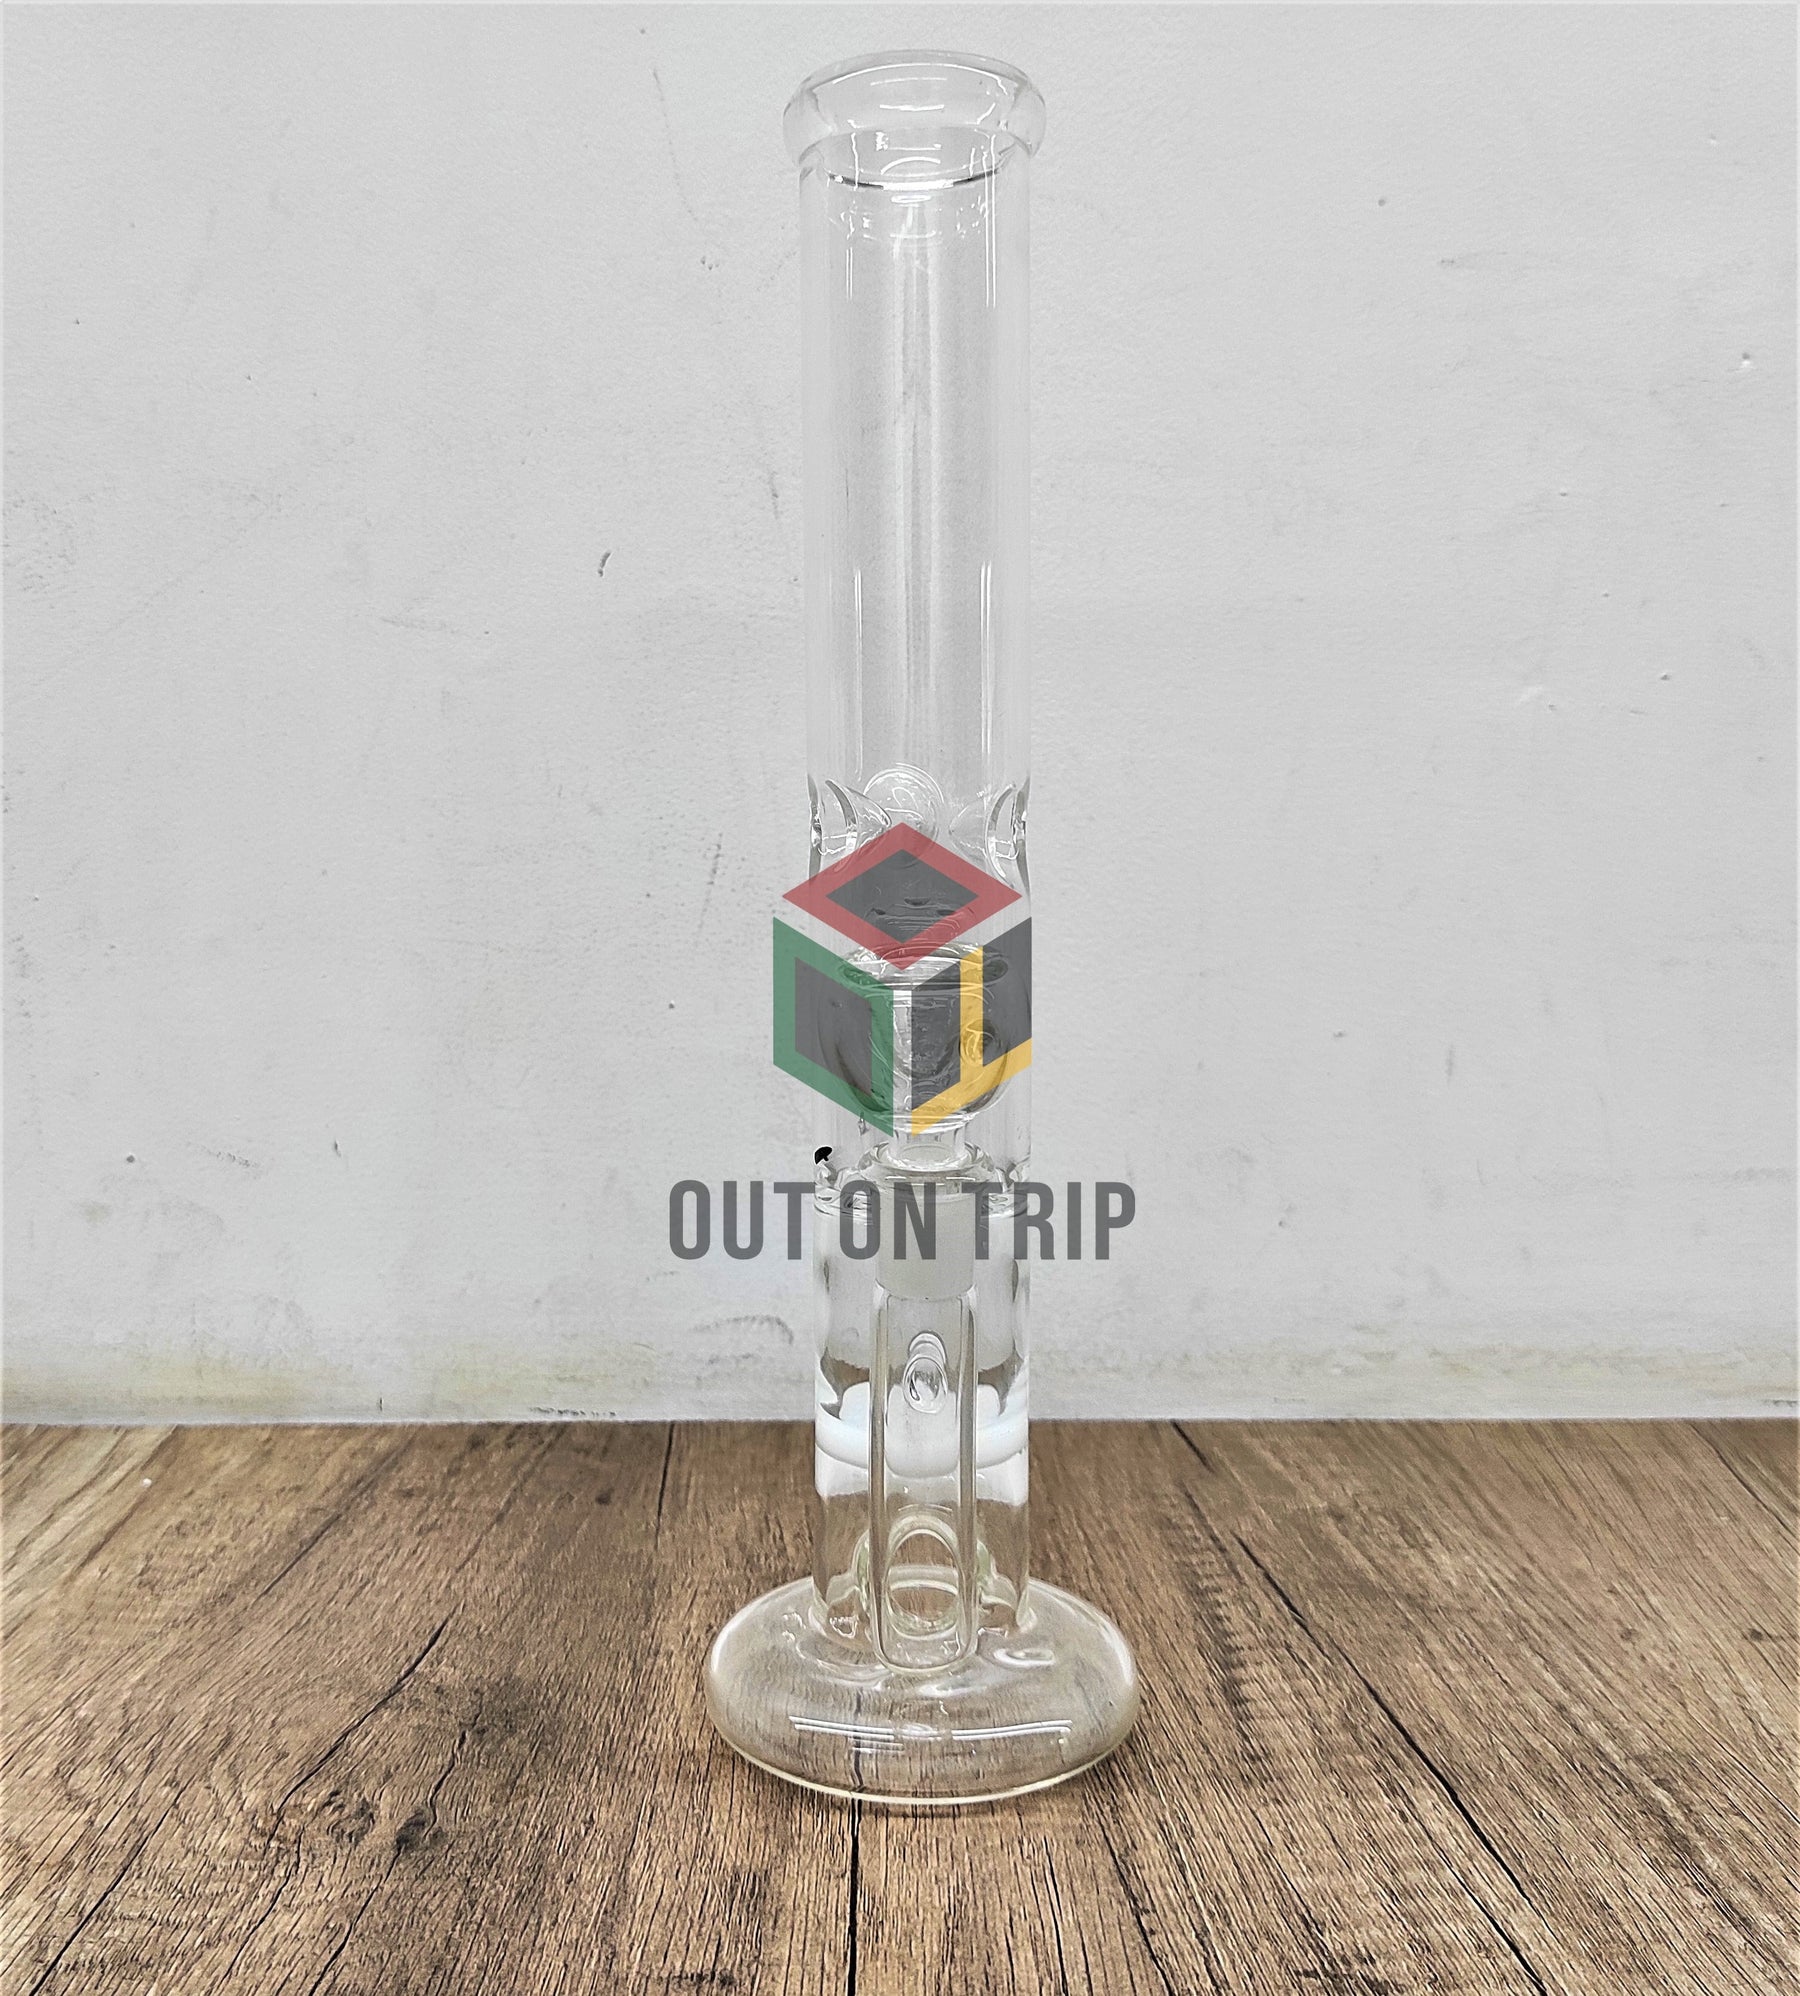 12 Inch Straight Tube Ice Catcher Assorted Colors Bong with UFO & Honeycomb Percolator (Discontinued)